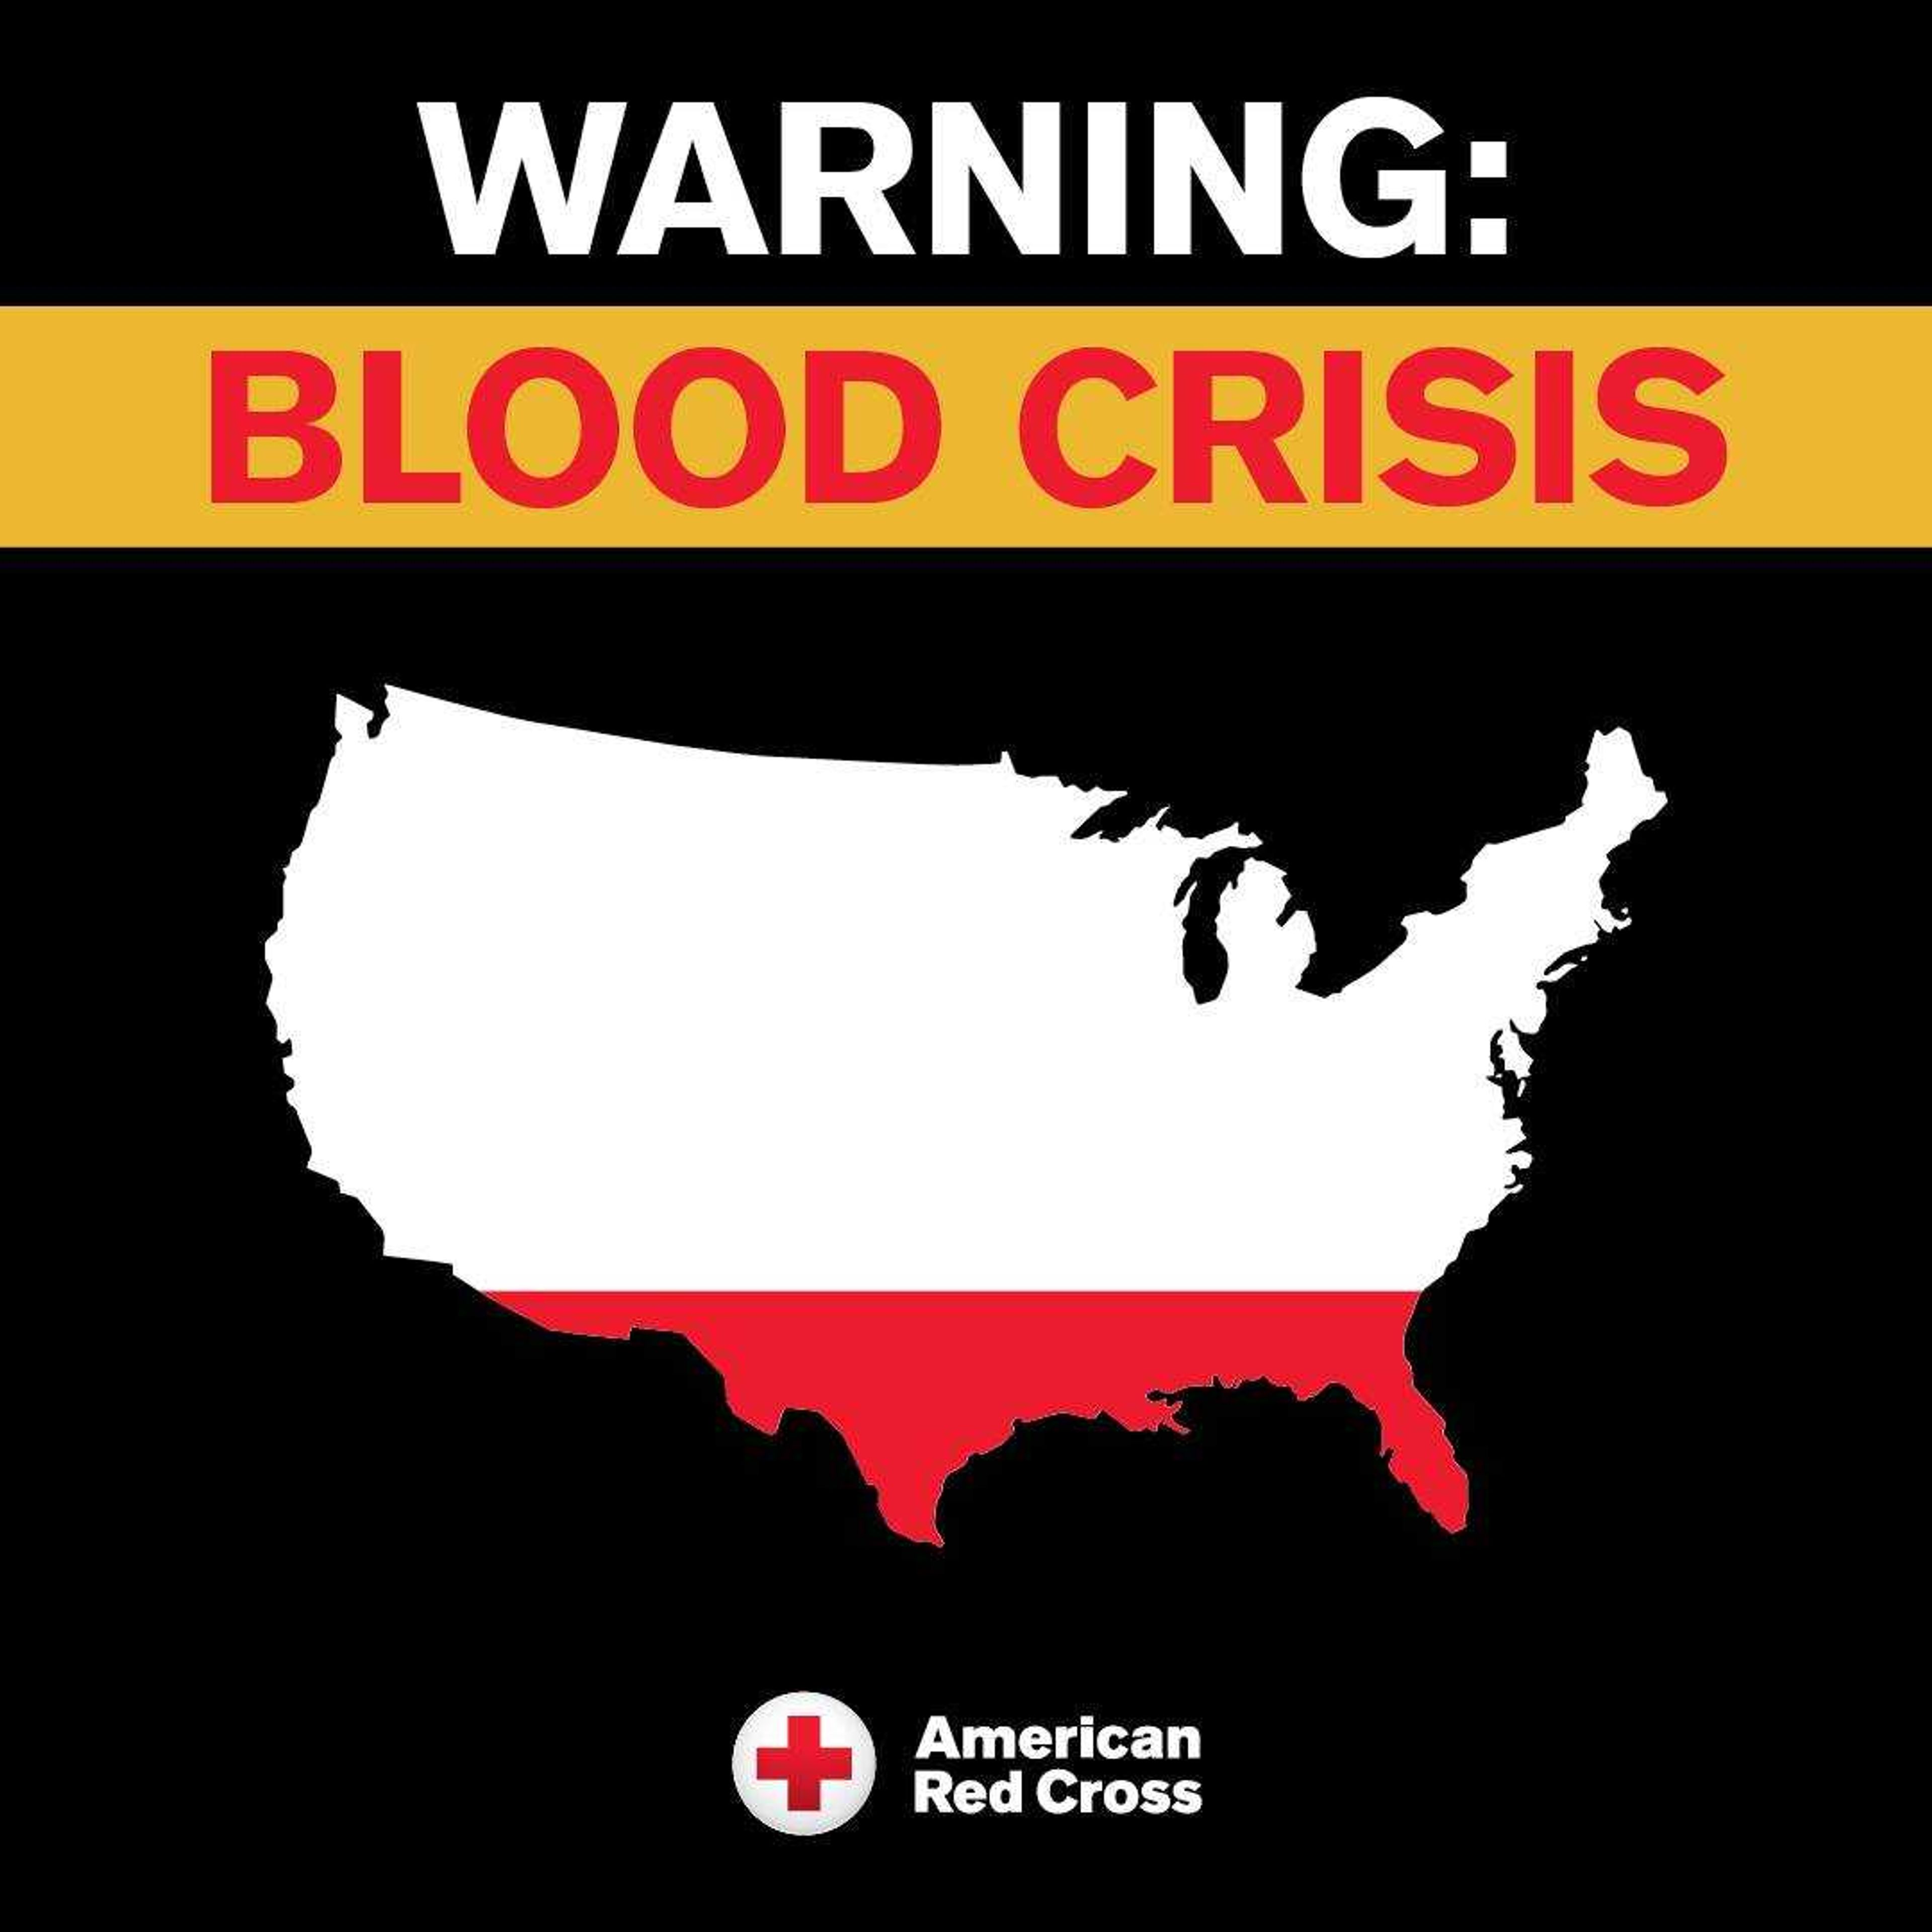 The American Red Cross is facing one of the worst blood shortages in decades. To help with the crisis, volunteers can donate blood at SEMO on Jan. 25 and 26.